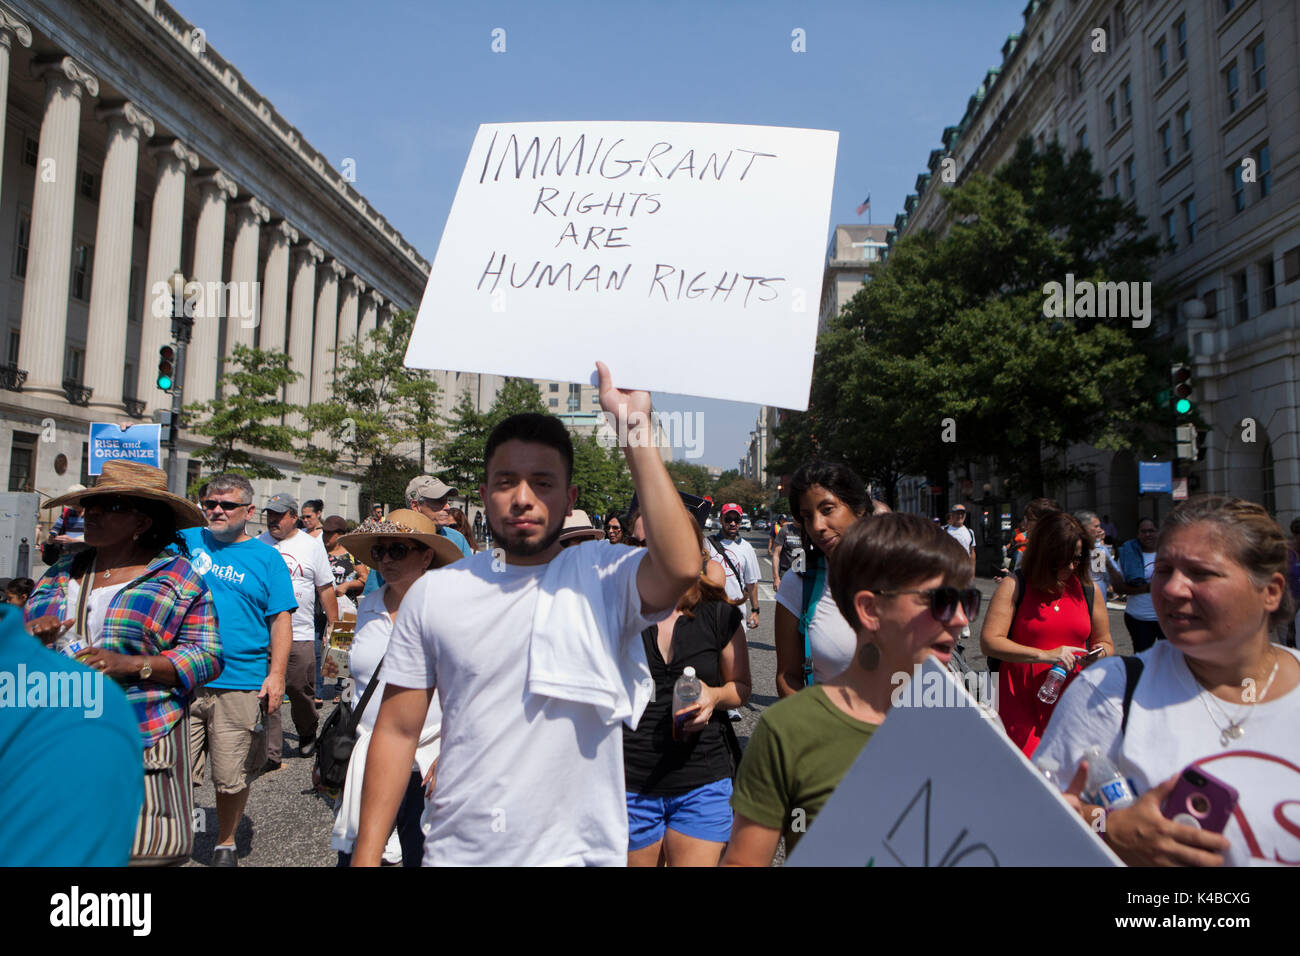 Washington, USA. 5th Sep, 2017. As President Donald Trump rescinds DACA (Deferred Action for Childhood Arrivals), a large crowd of DACA supporters gather at the White House to protest against the Trump administration's decision. Credit: B Christopher/Alamy Live News Stock Photo